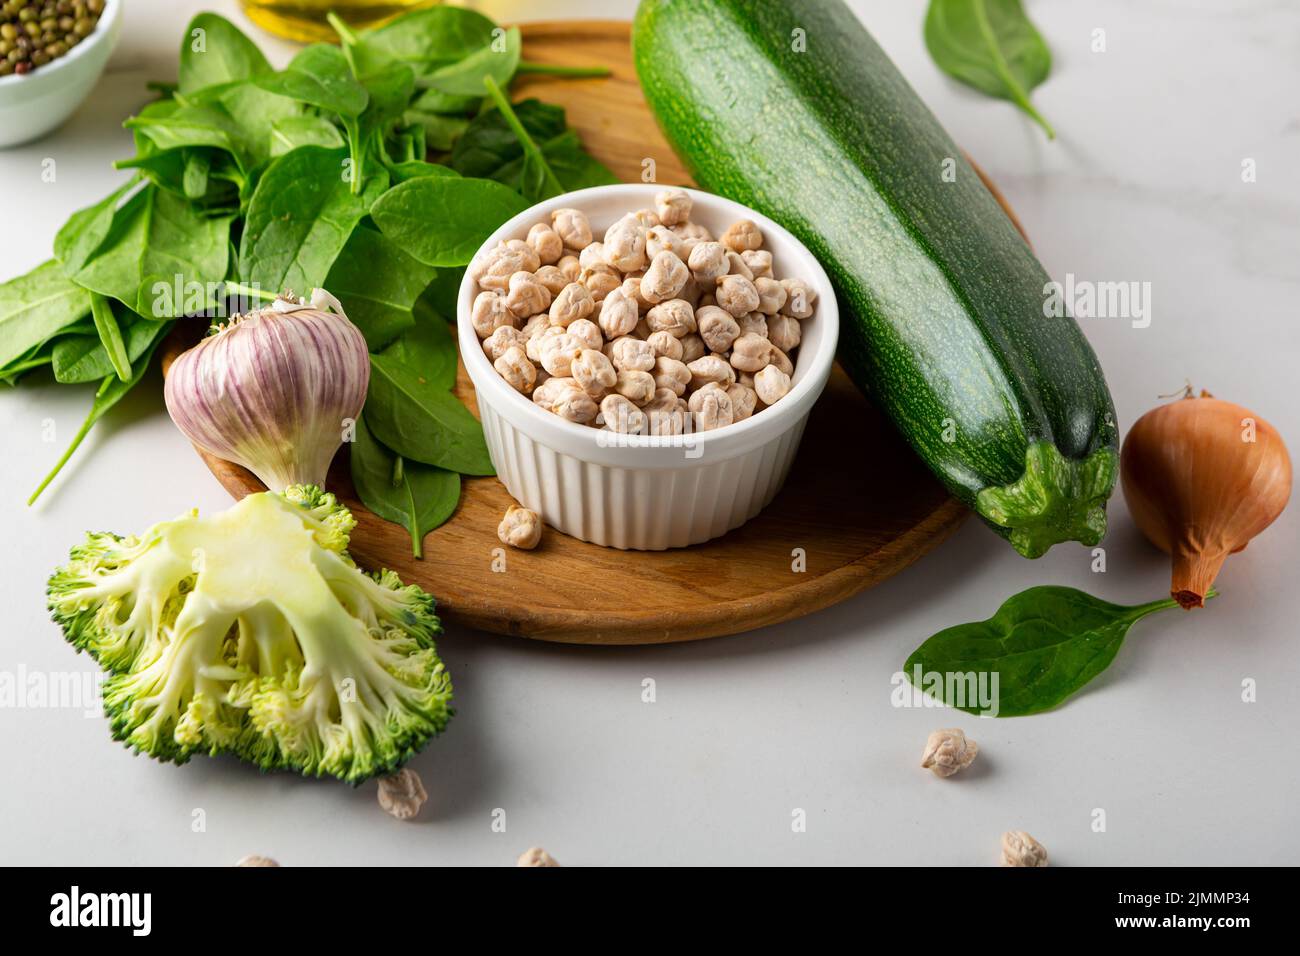 Chick pea and vegetables spinach vegan food cooking ingredients broccoli zucchini Stock Photo